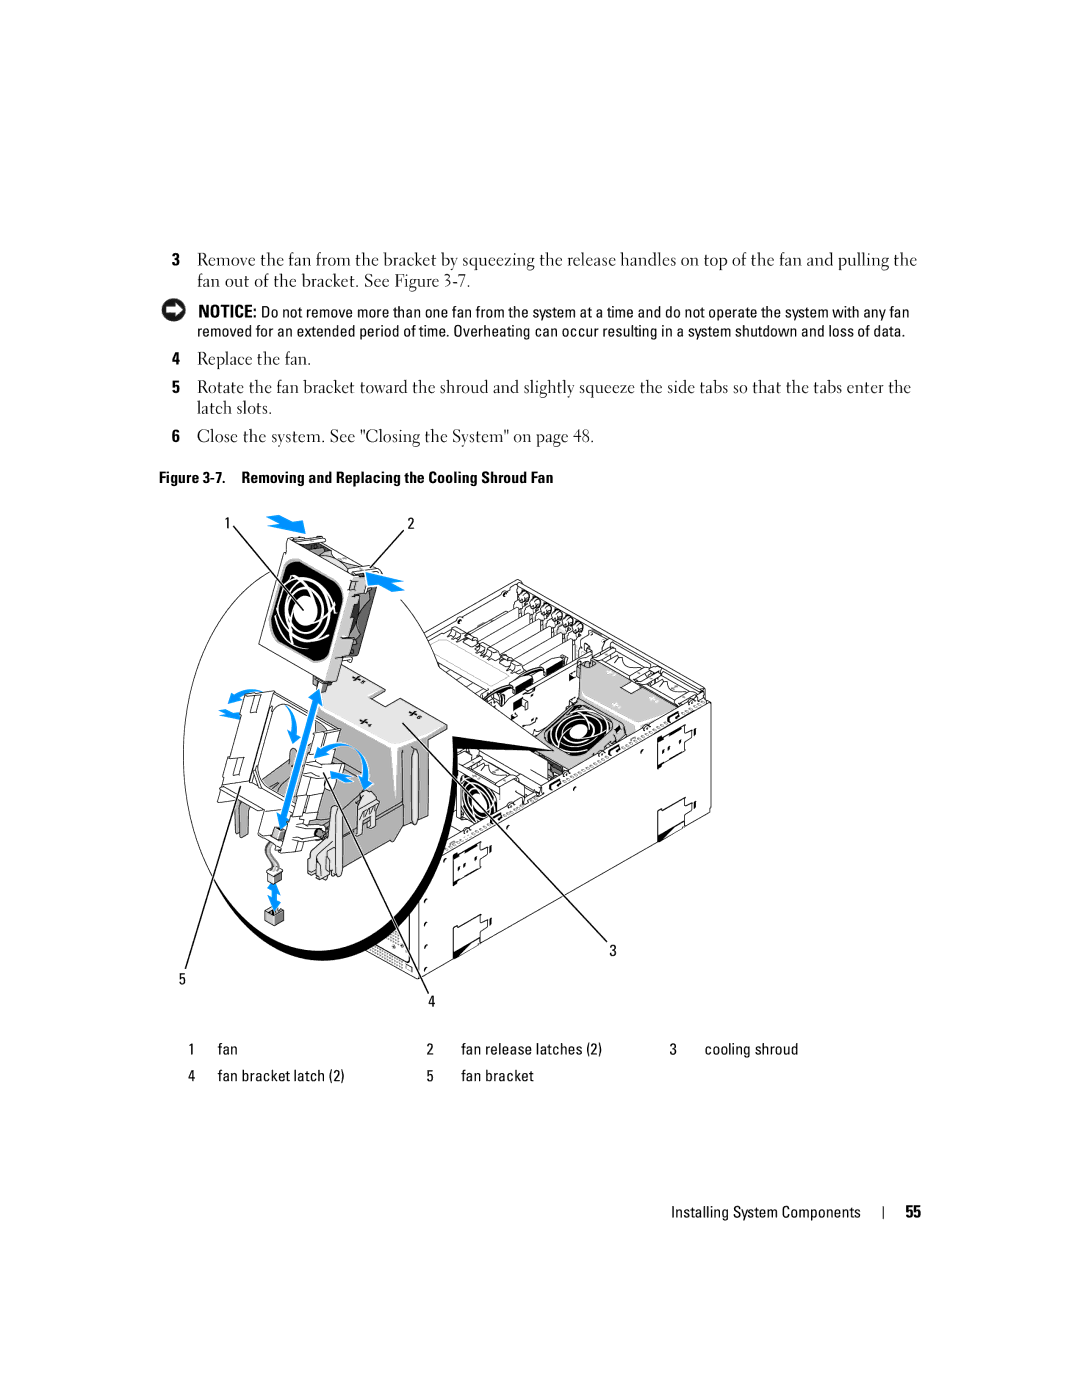 Dell 1900 owner manual Removing and Replacing the Cooling Shroud Fan, Fan bracket latch Installing System Components 